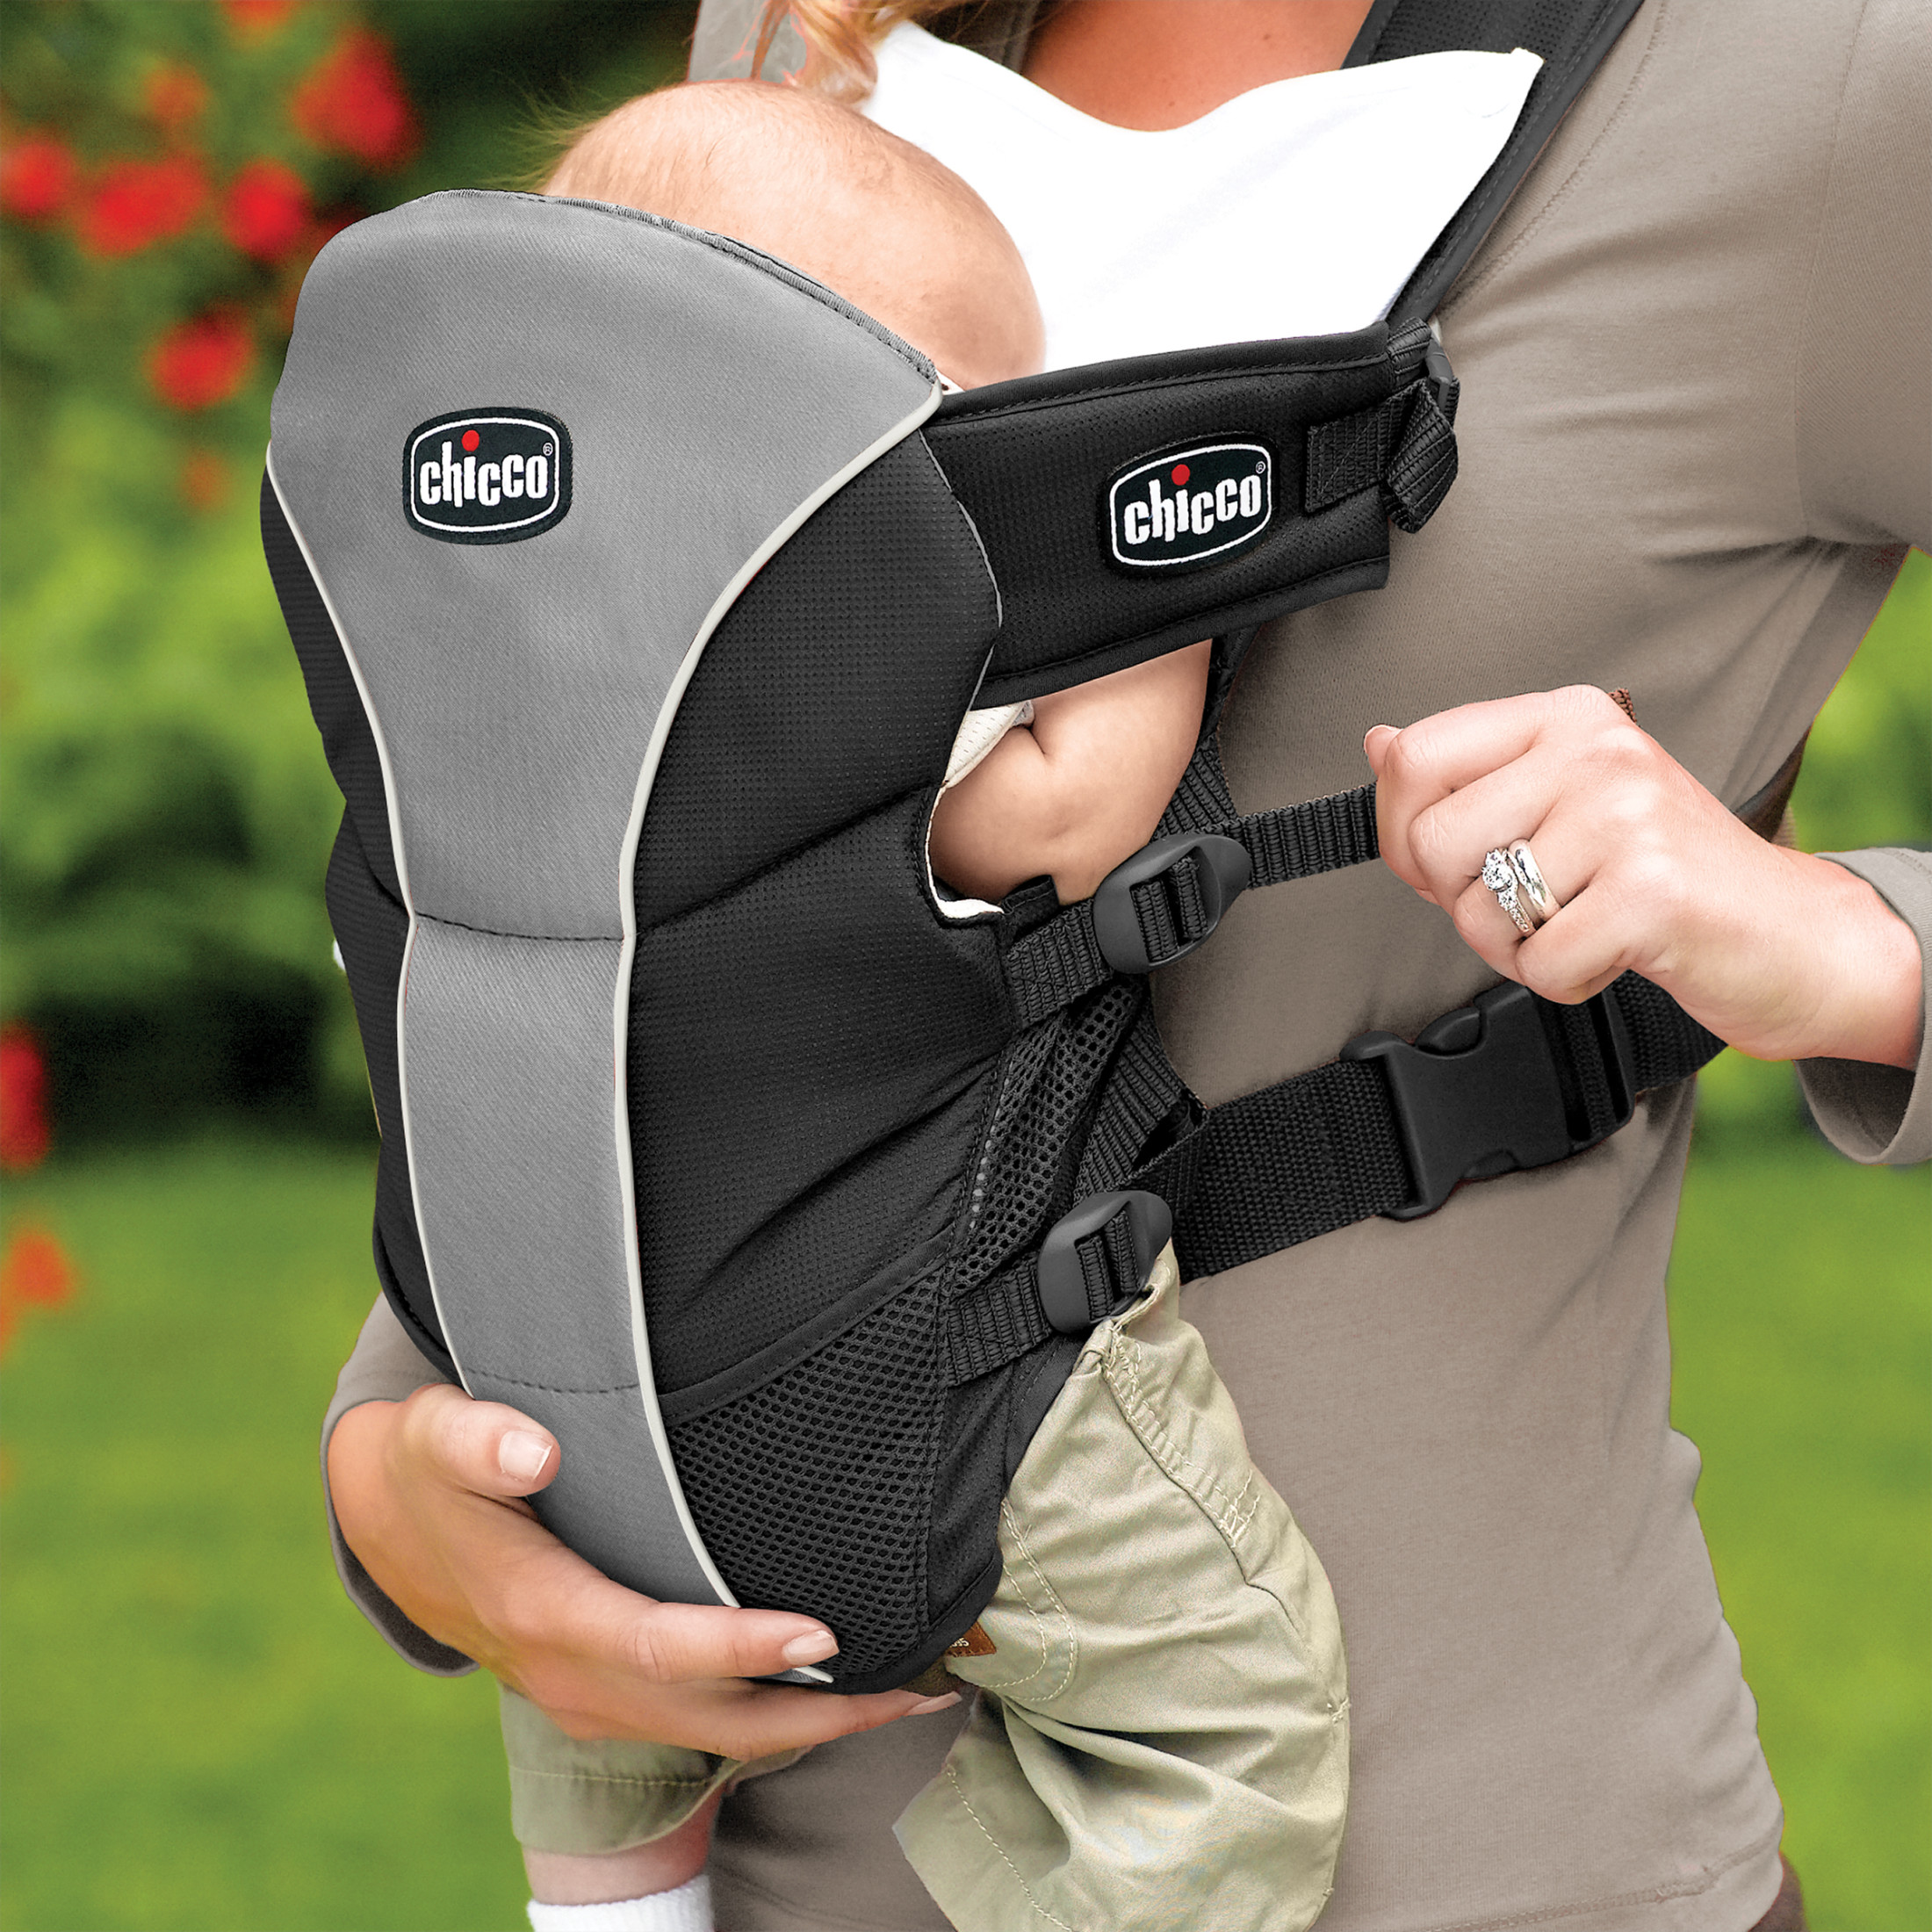 Chicco UltraSoft Infant Carrier - Poetic () - image 5 of 8